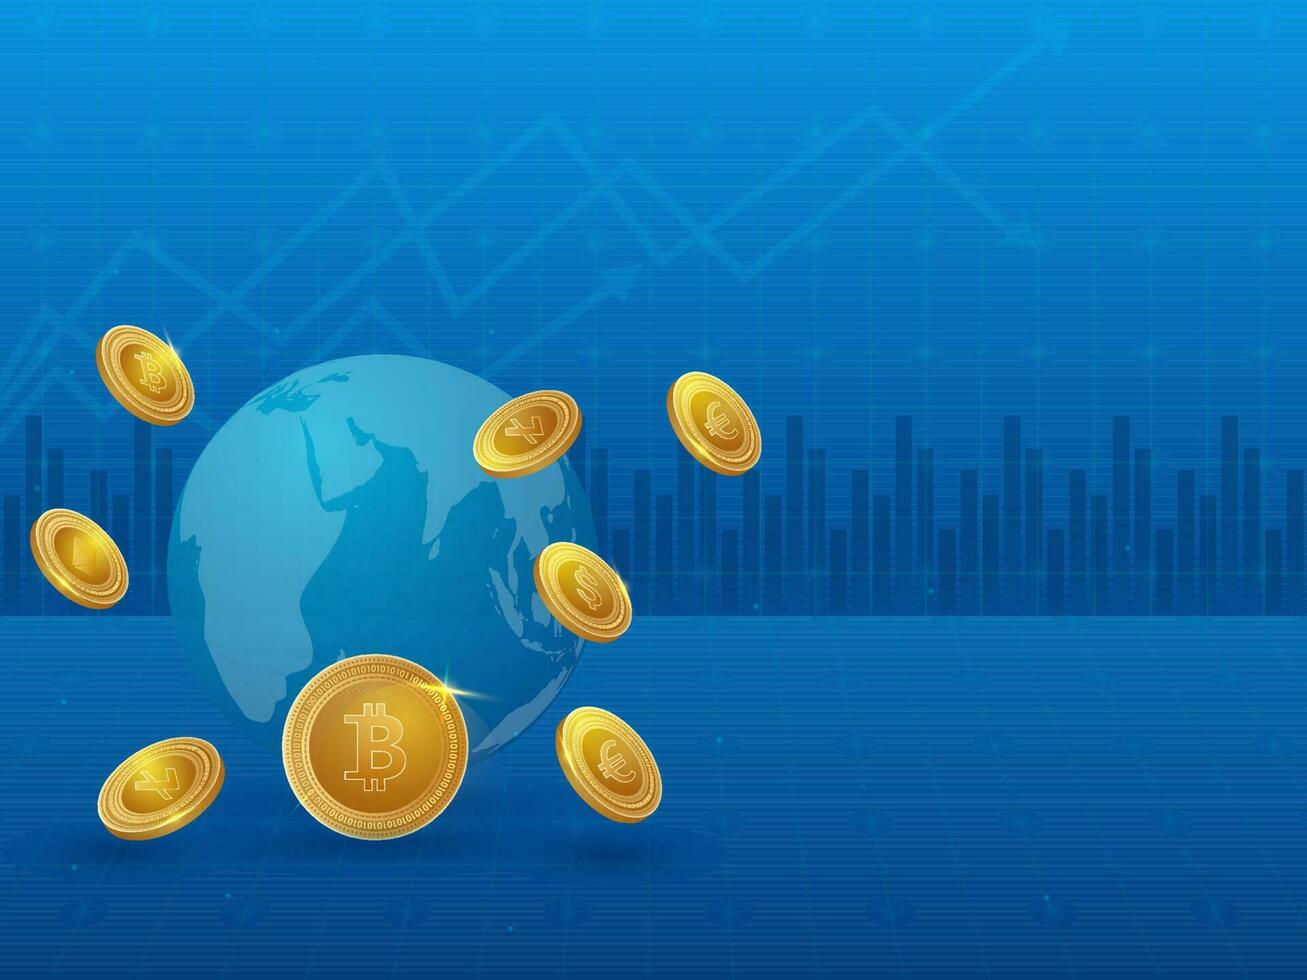 3D Illustration Of Earth Globe With Golden Coins On Blue Statistics Background For Cryptocurrency Concept. vector